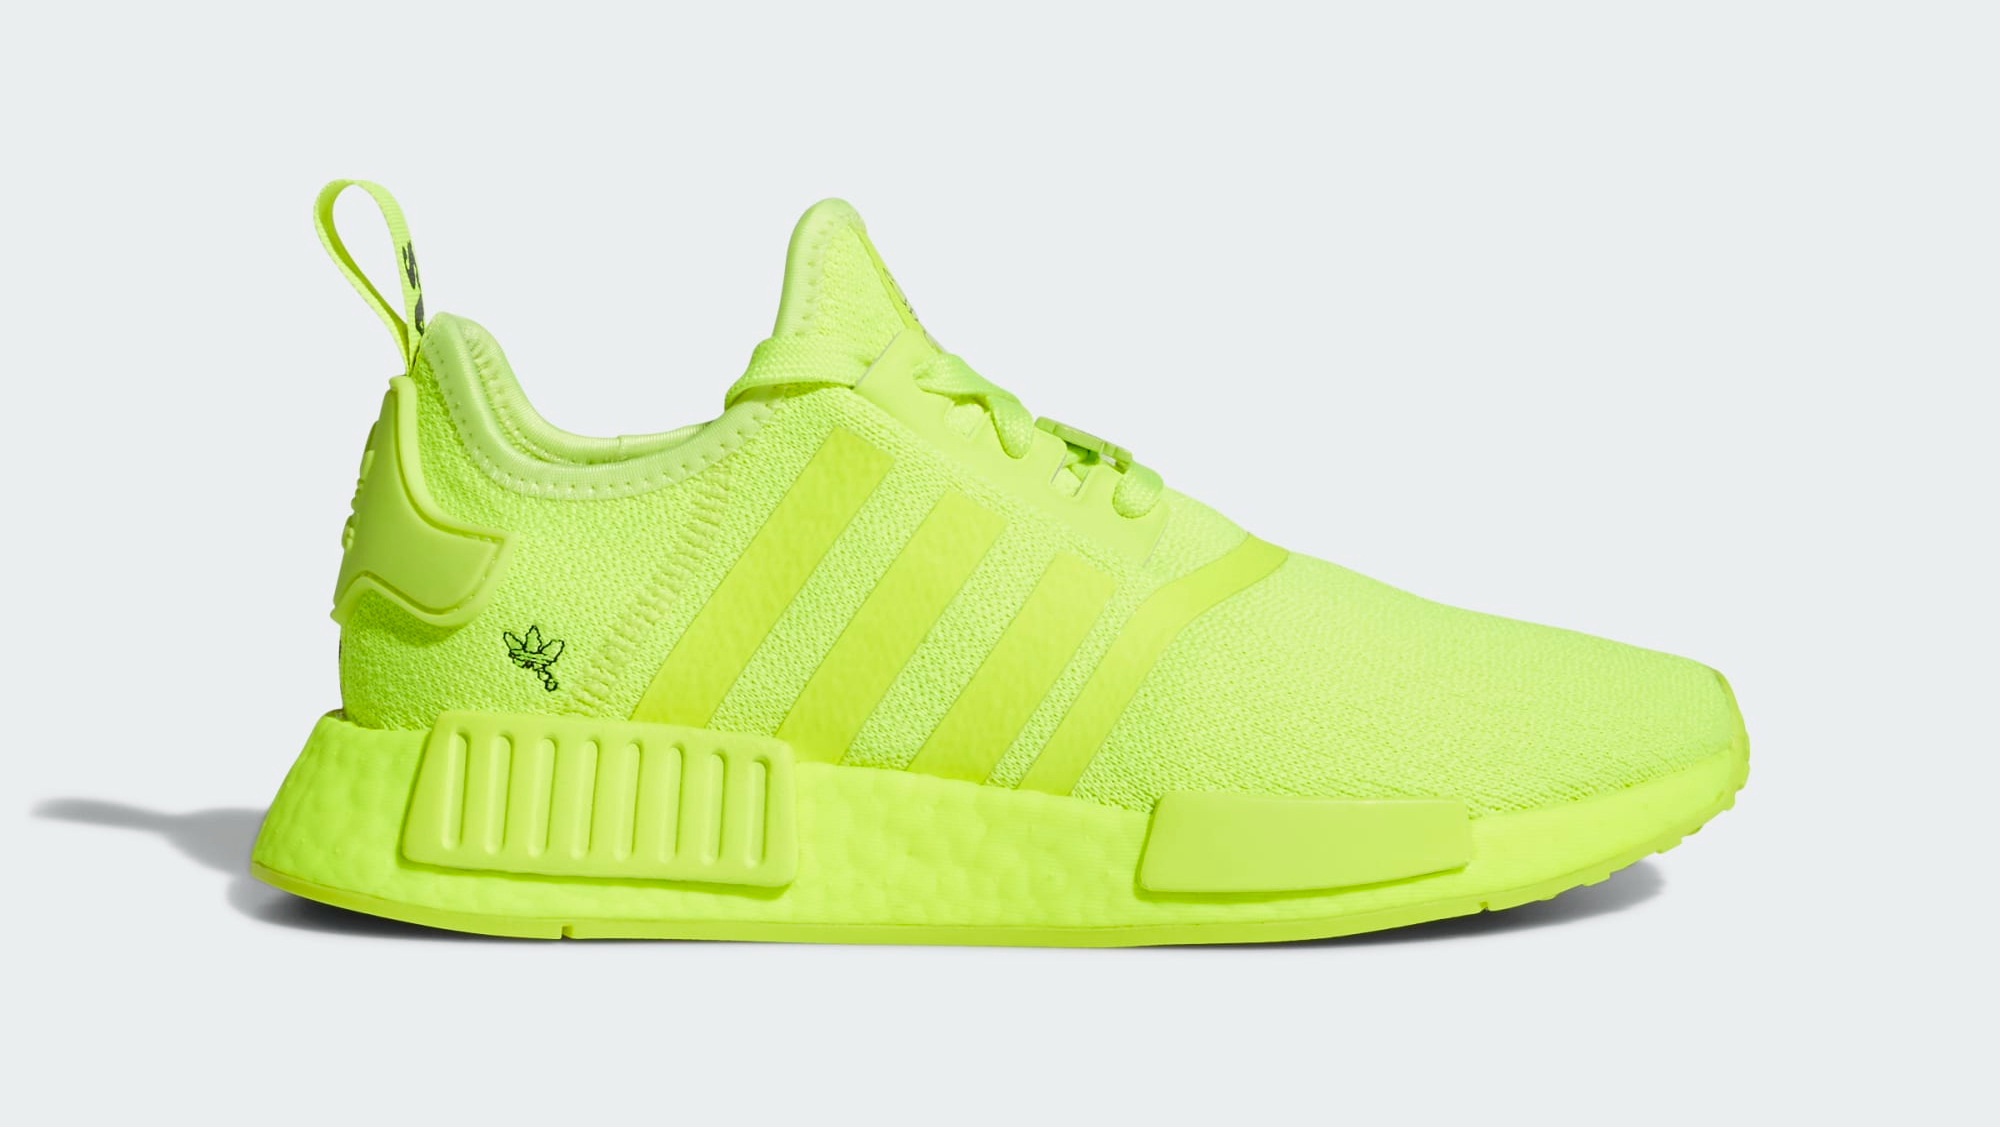 Hej hej ost skjule Adidas NMD_R1 Women's Core Black/Solar Yellow/Cloud White | Adidas |  Release Dates, Sneaker Calendar, Prices & Collaborations